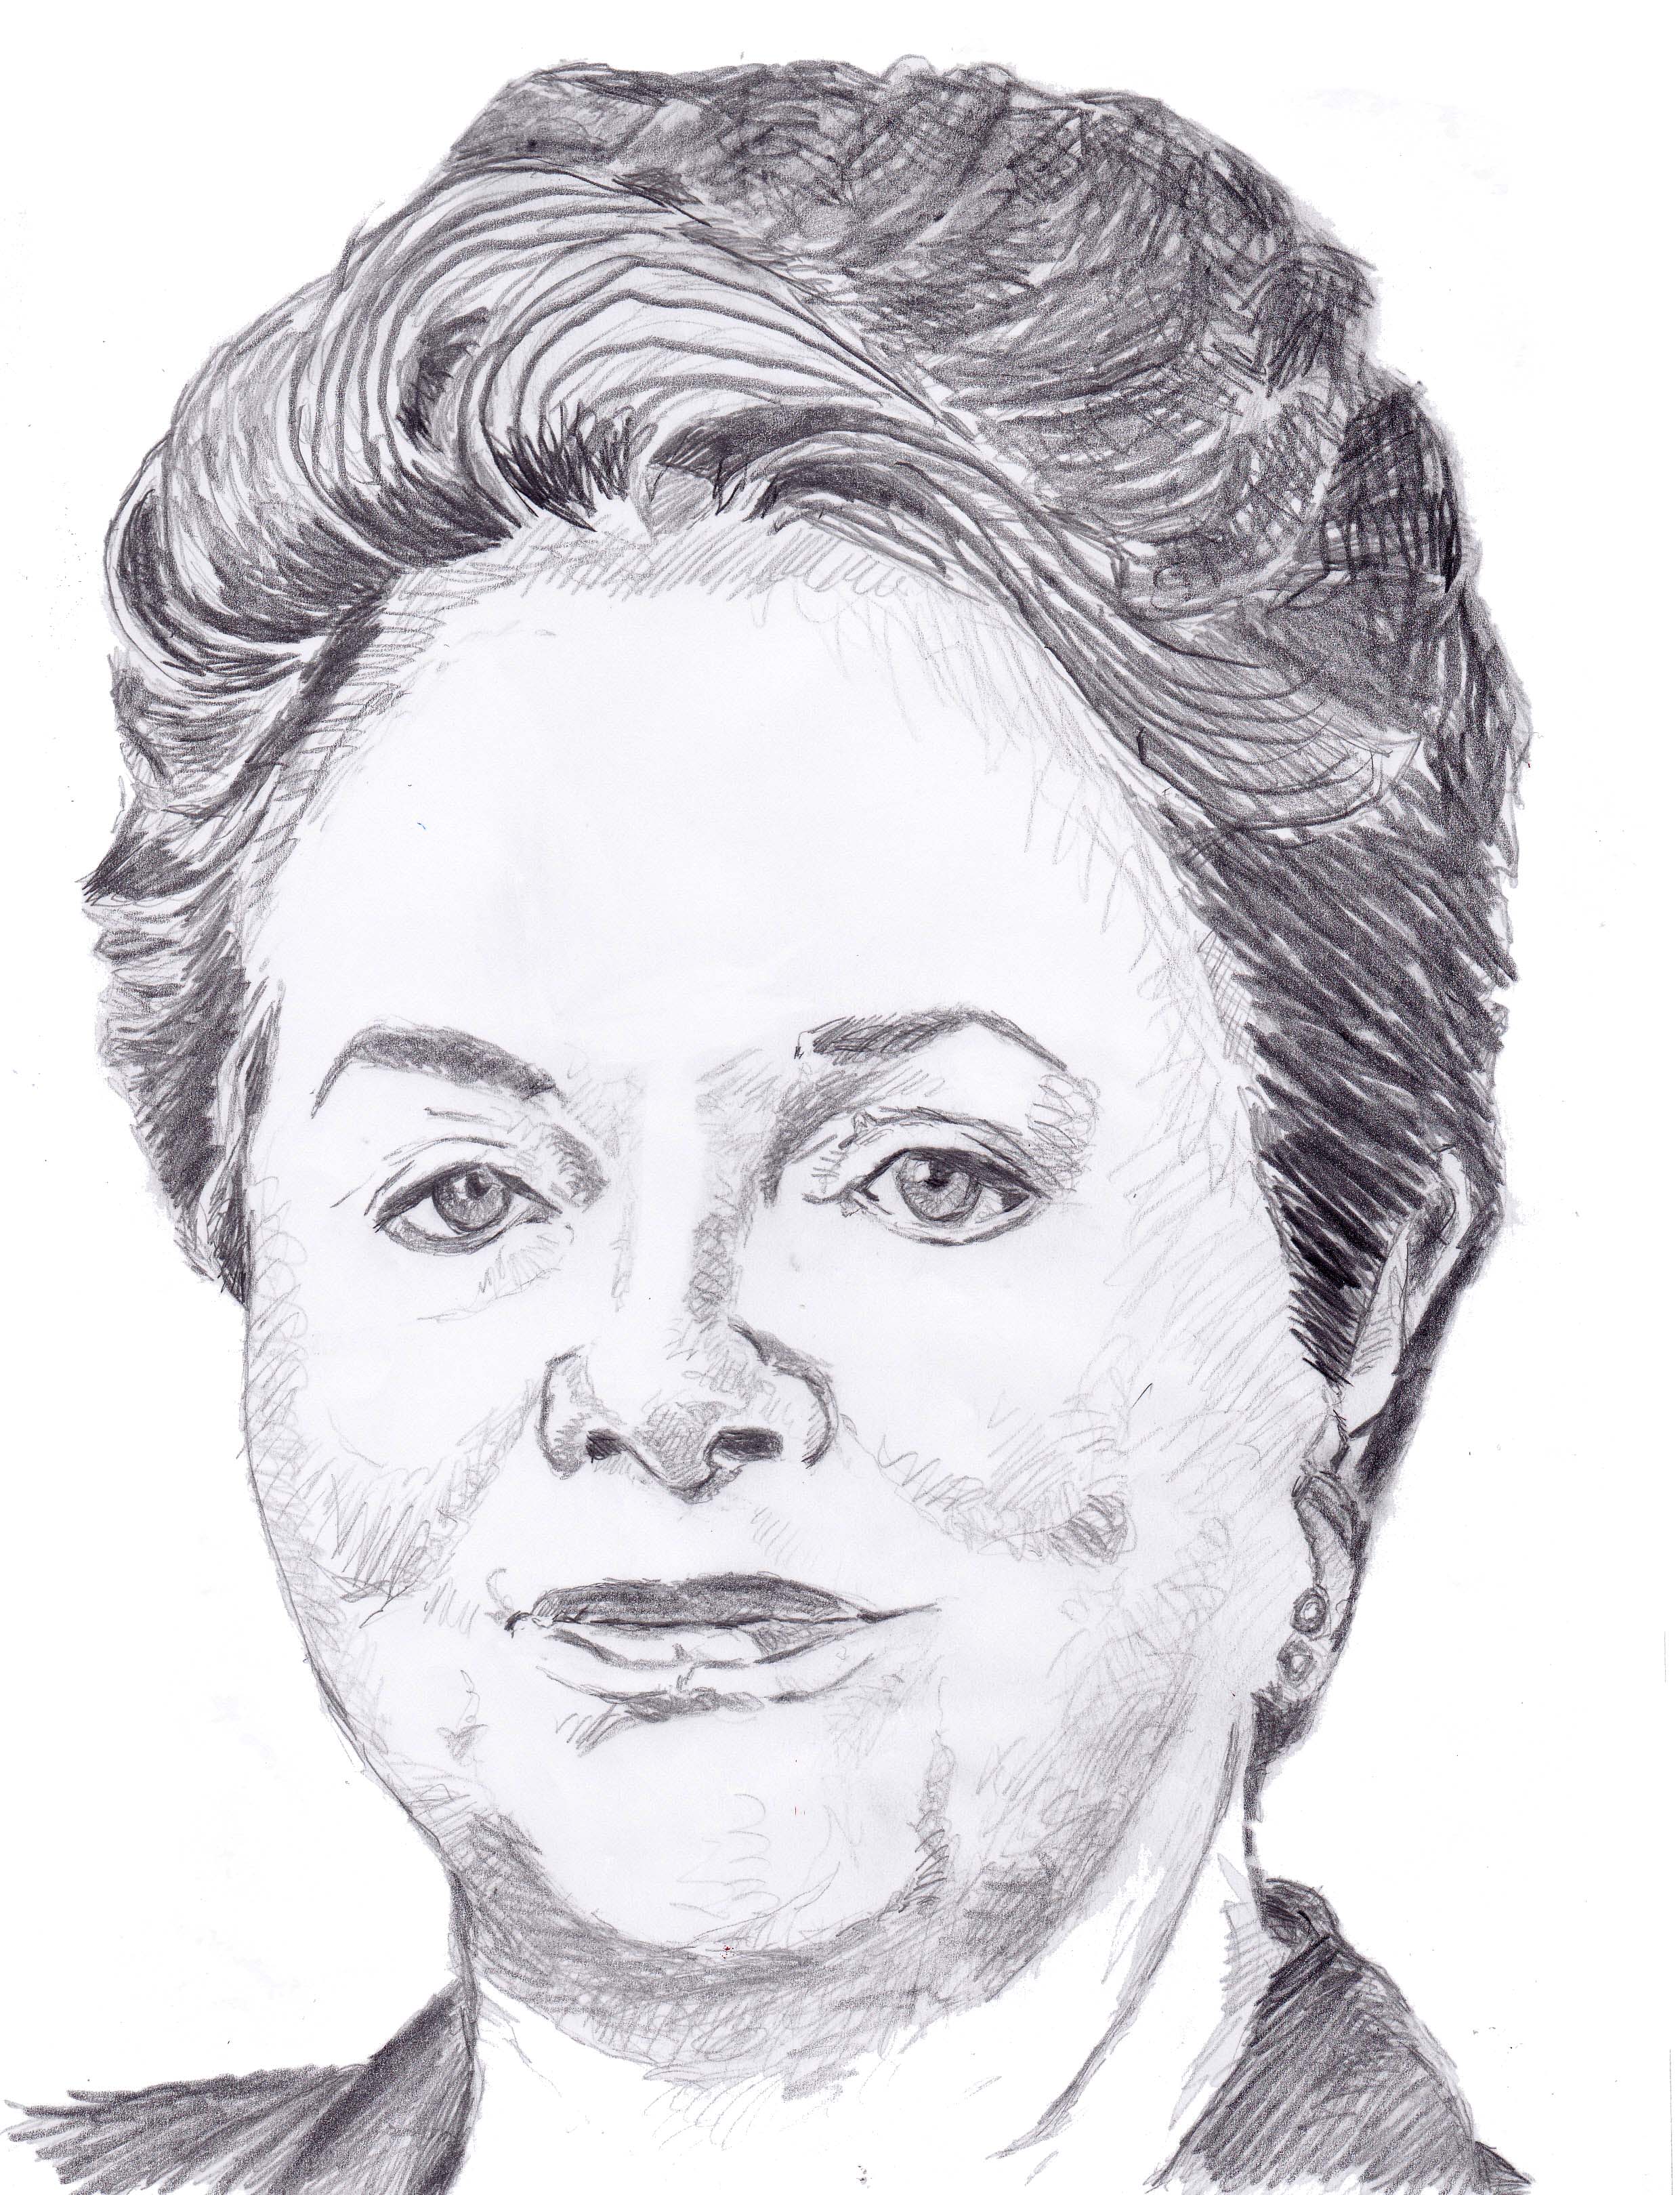 Dilma Rousseff. Crédito Muriel Epailly.